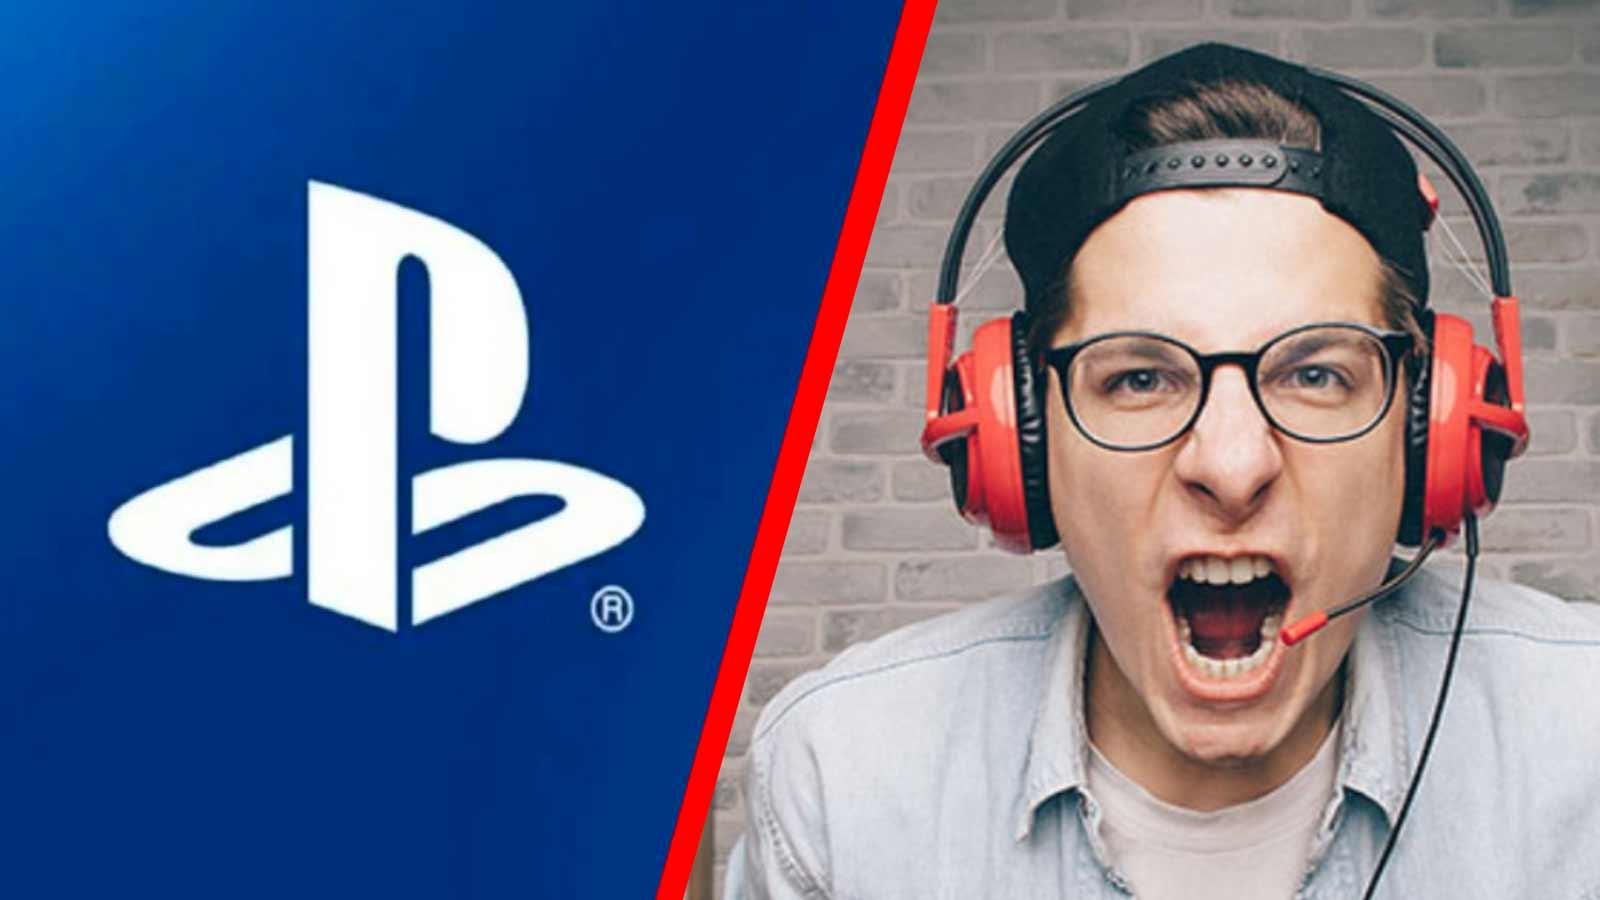 PS5 Tiny: Fan goes viral for making Sony console even slimmer